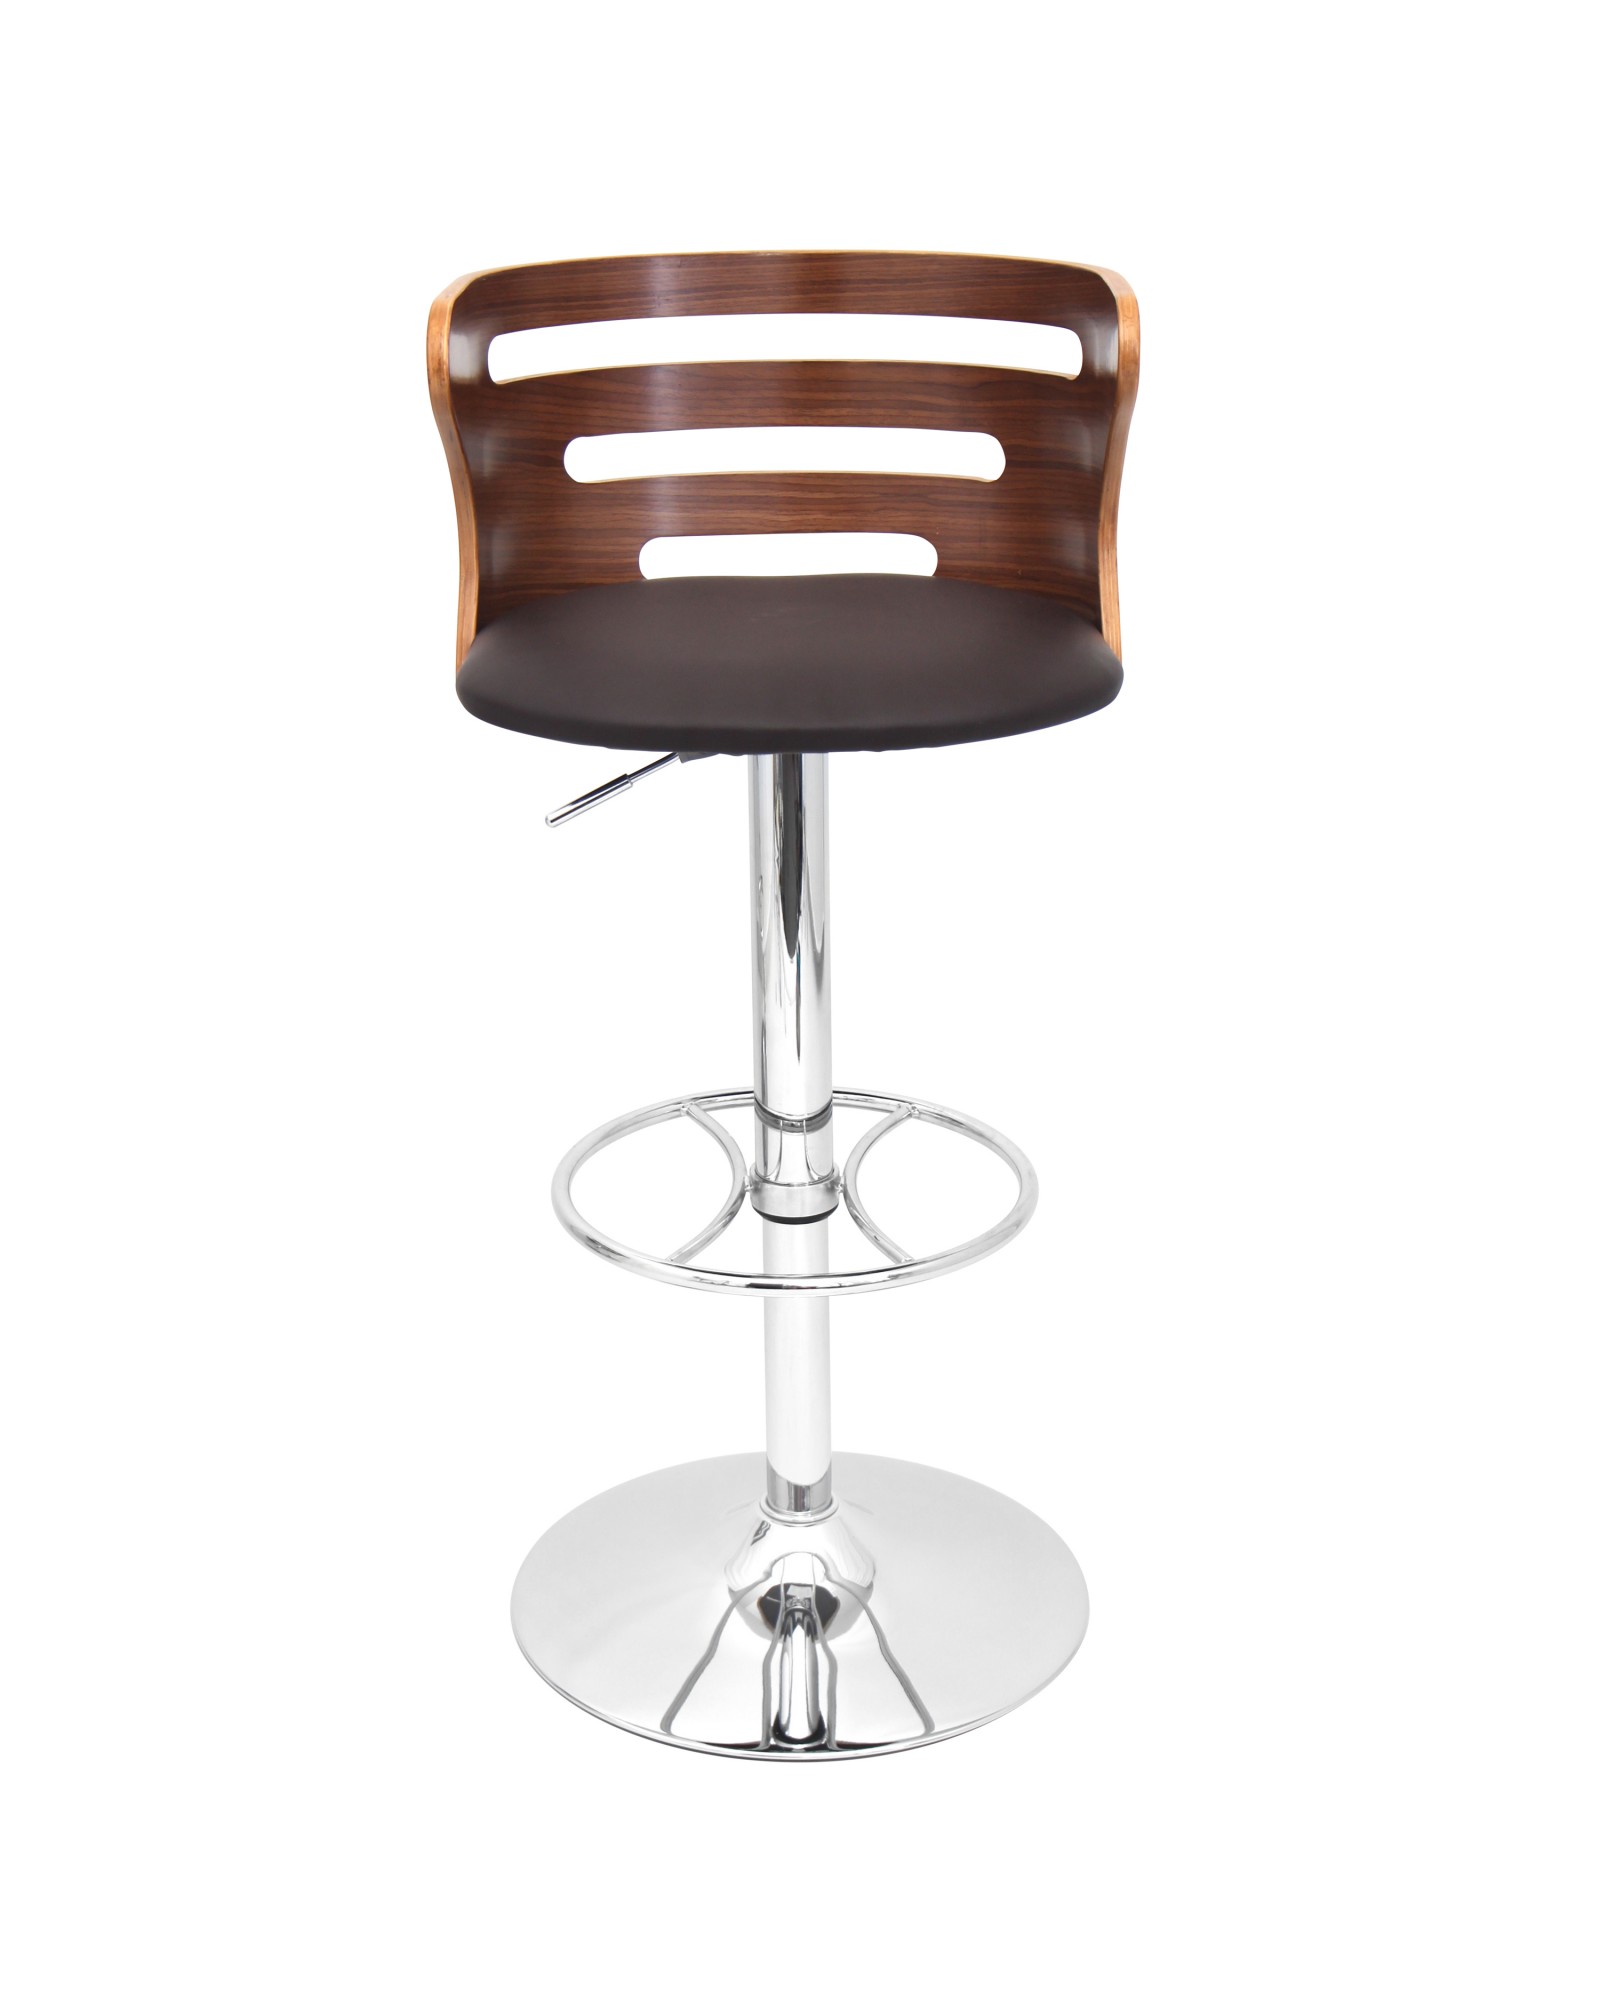 Cosi Mid-Century Modern Adjustable Barstool with Swivel in Walnut and Grey Faux Leather